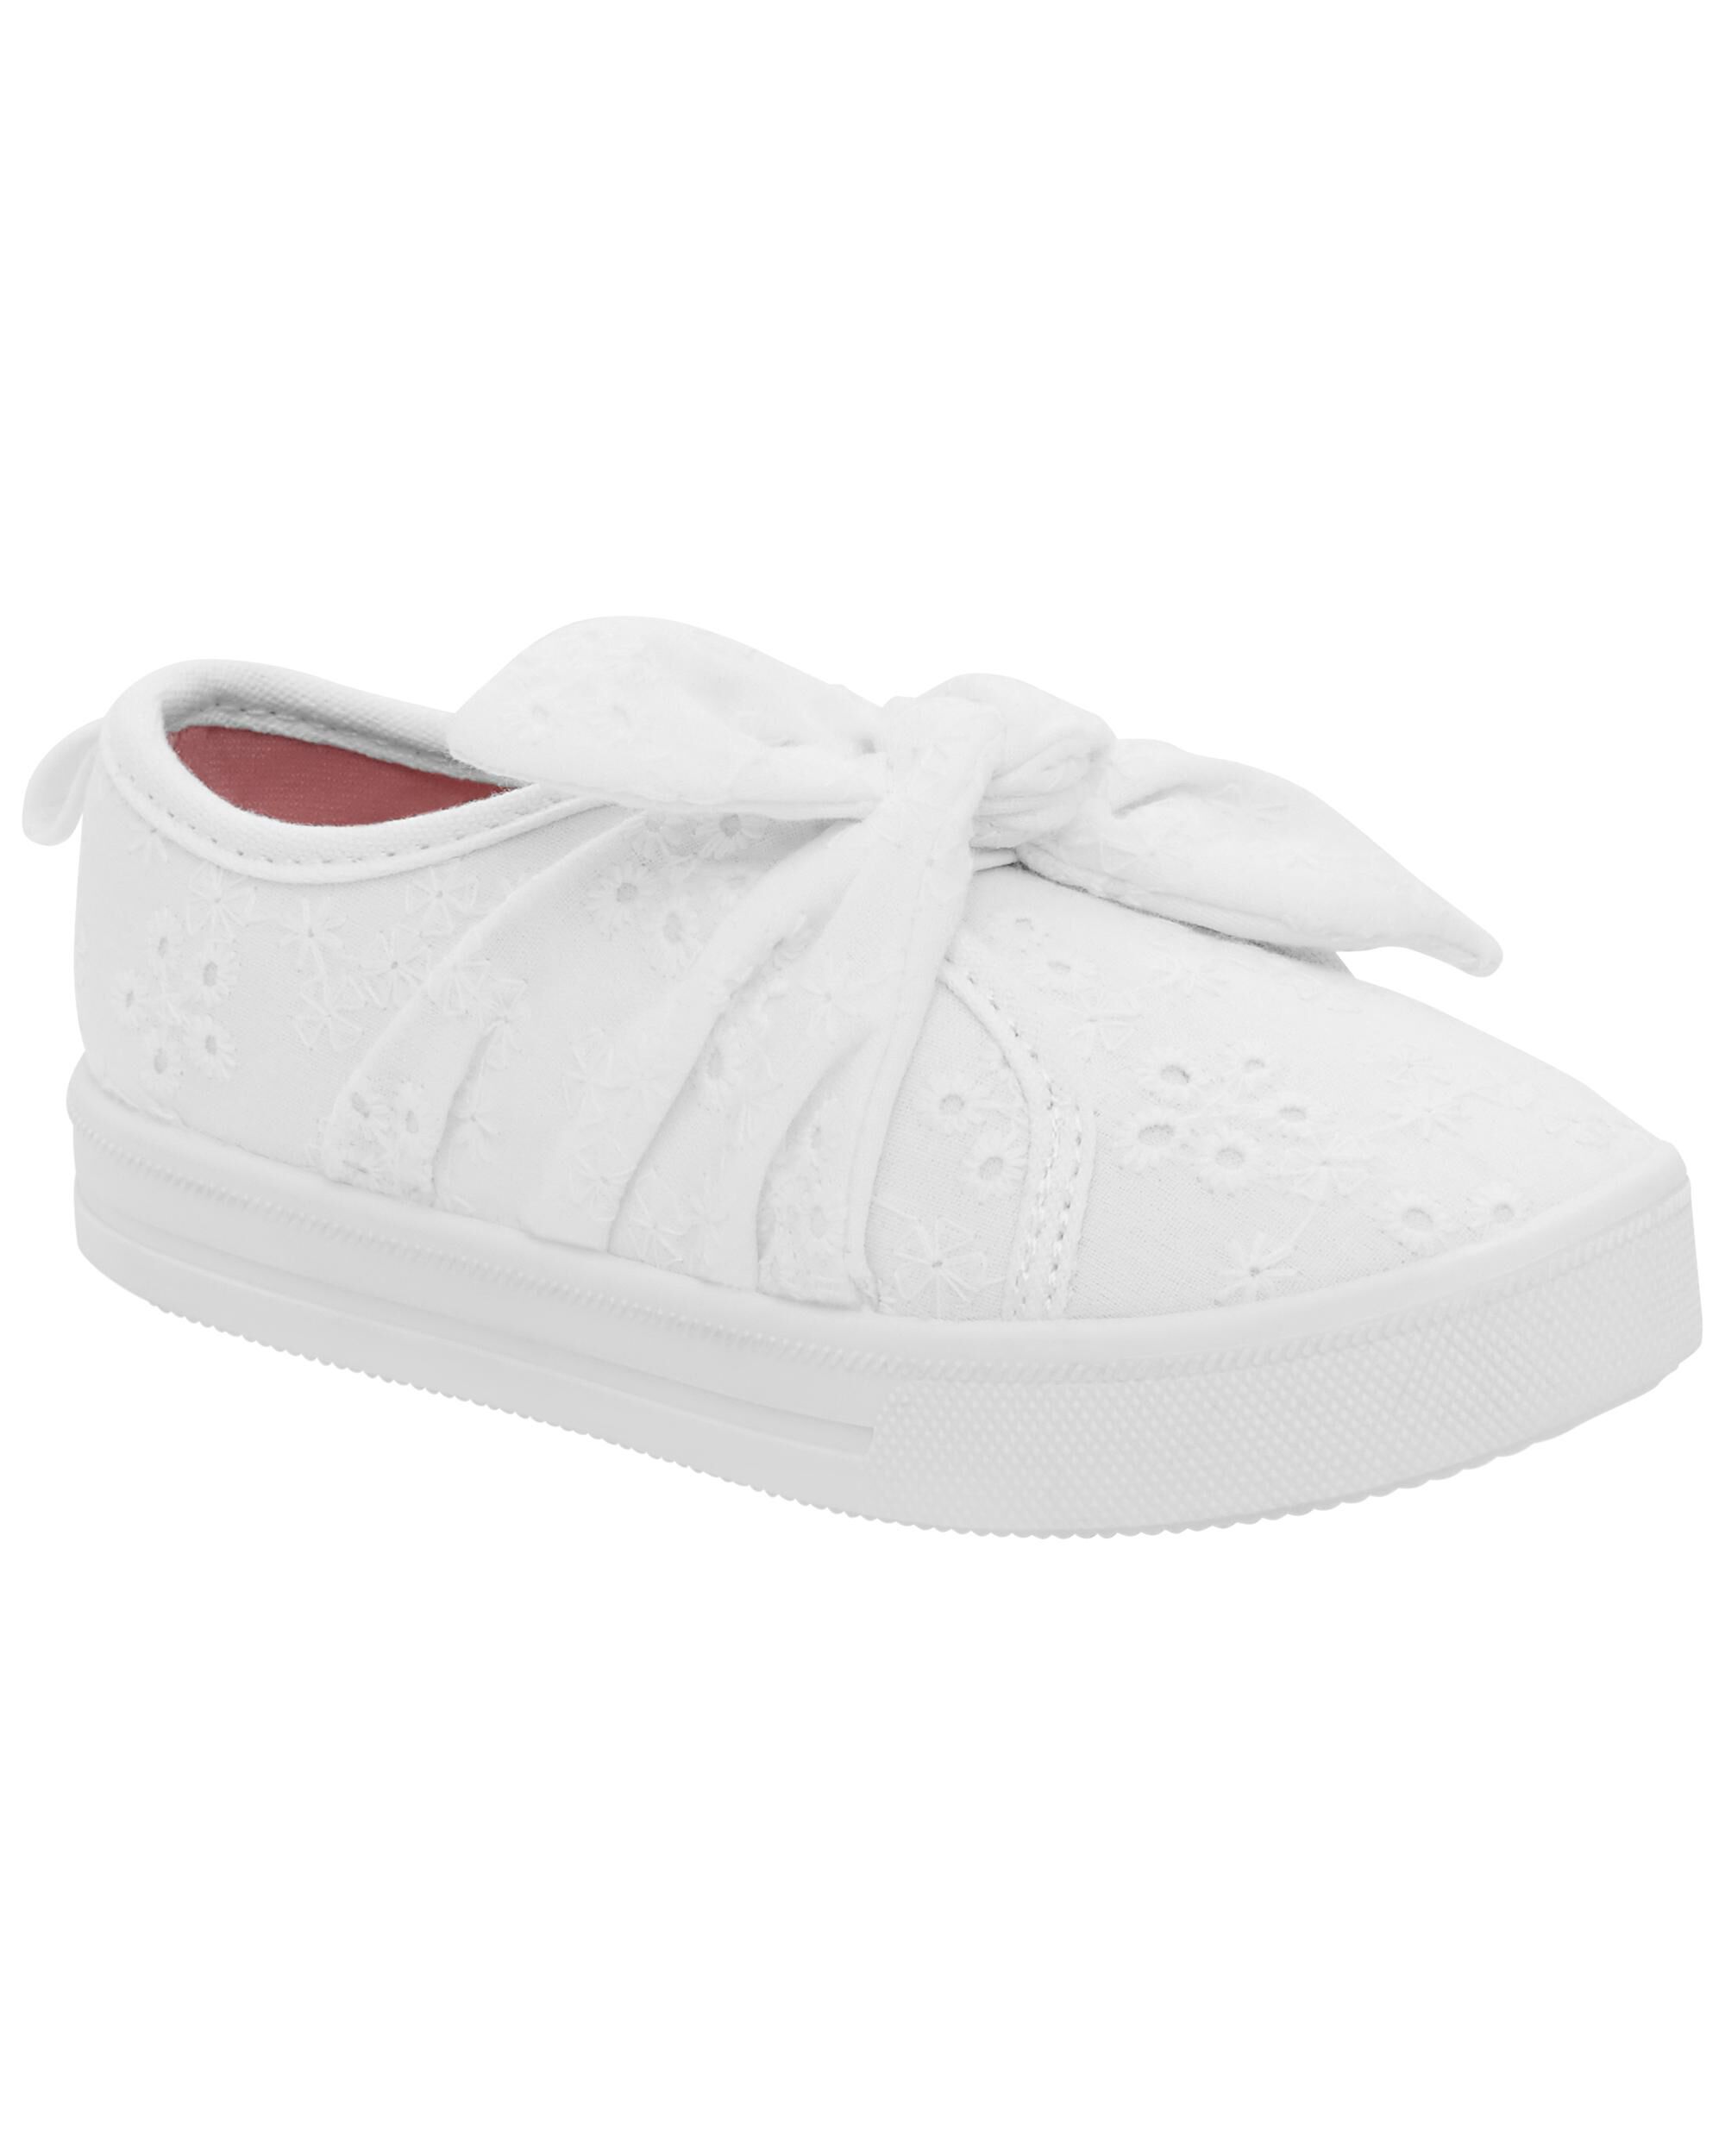 Children's Sport Shoes Lace-up Big Star KK374222 White - KeeShoes